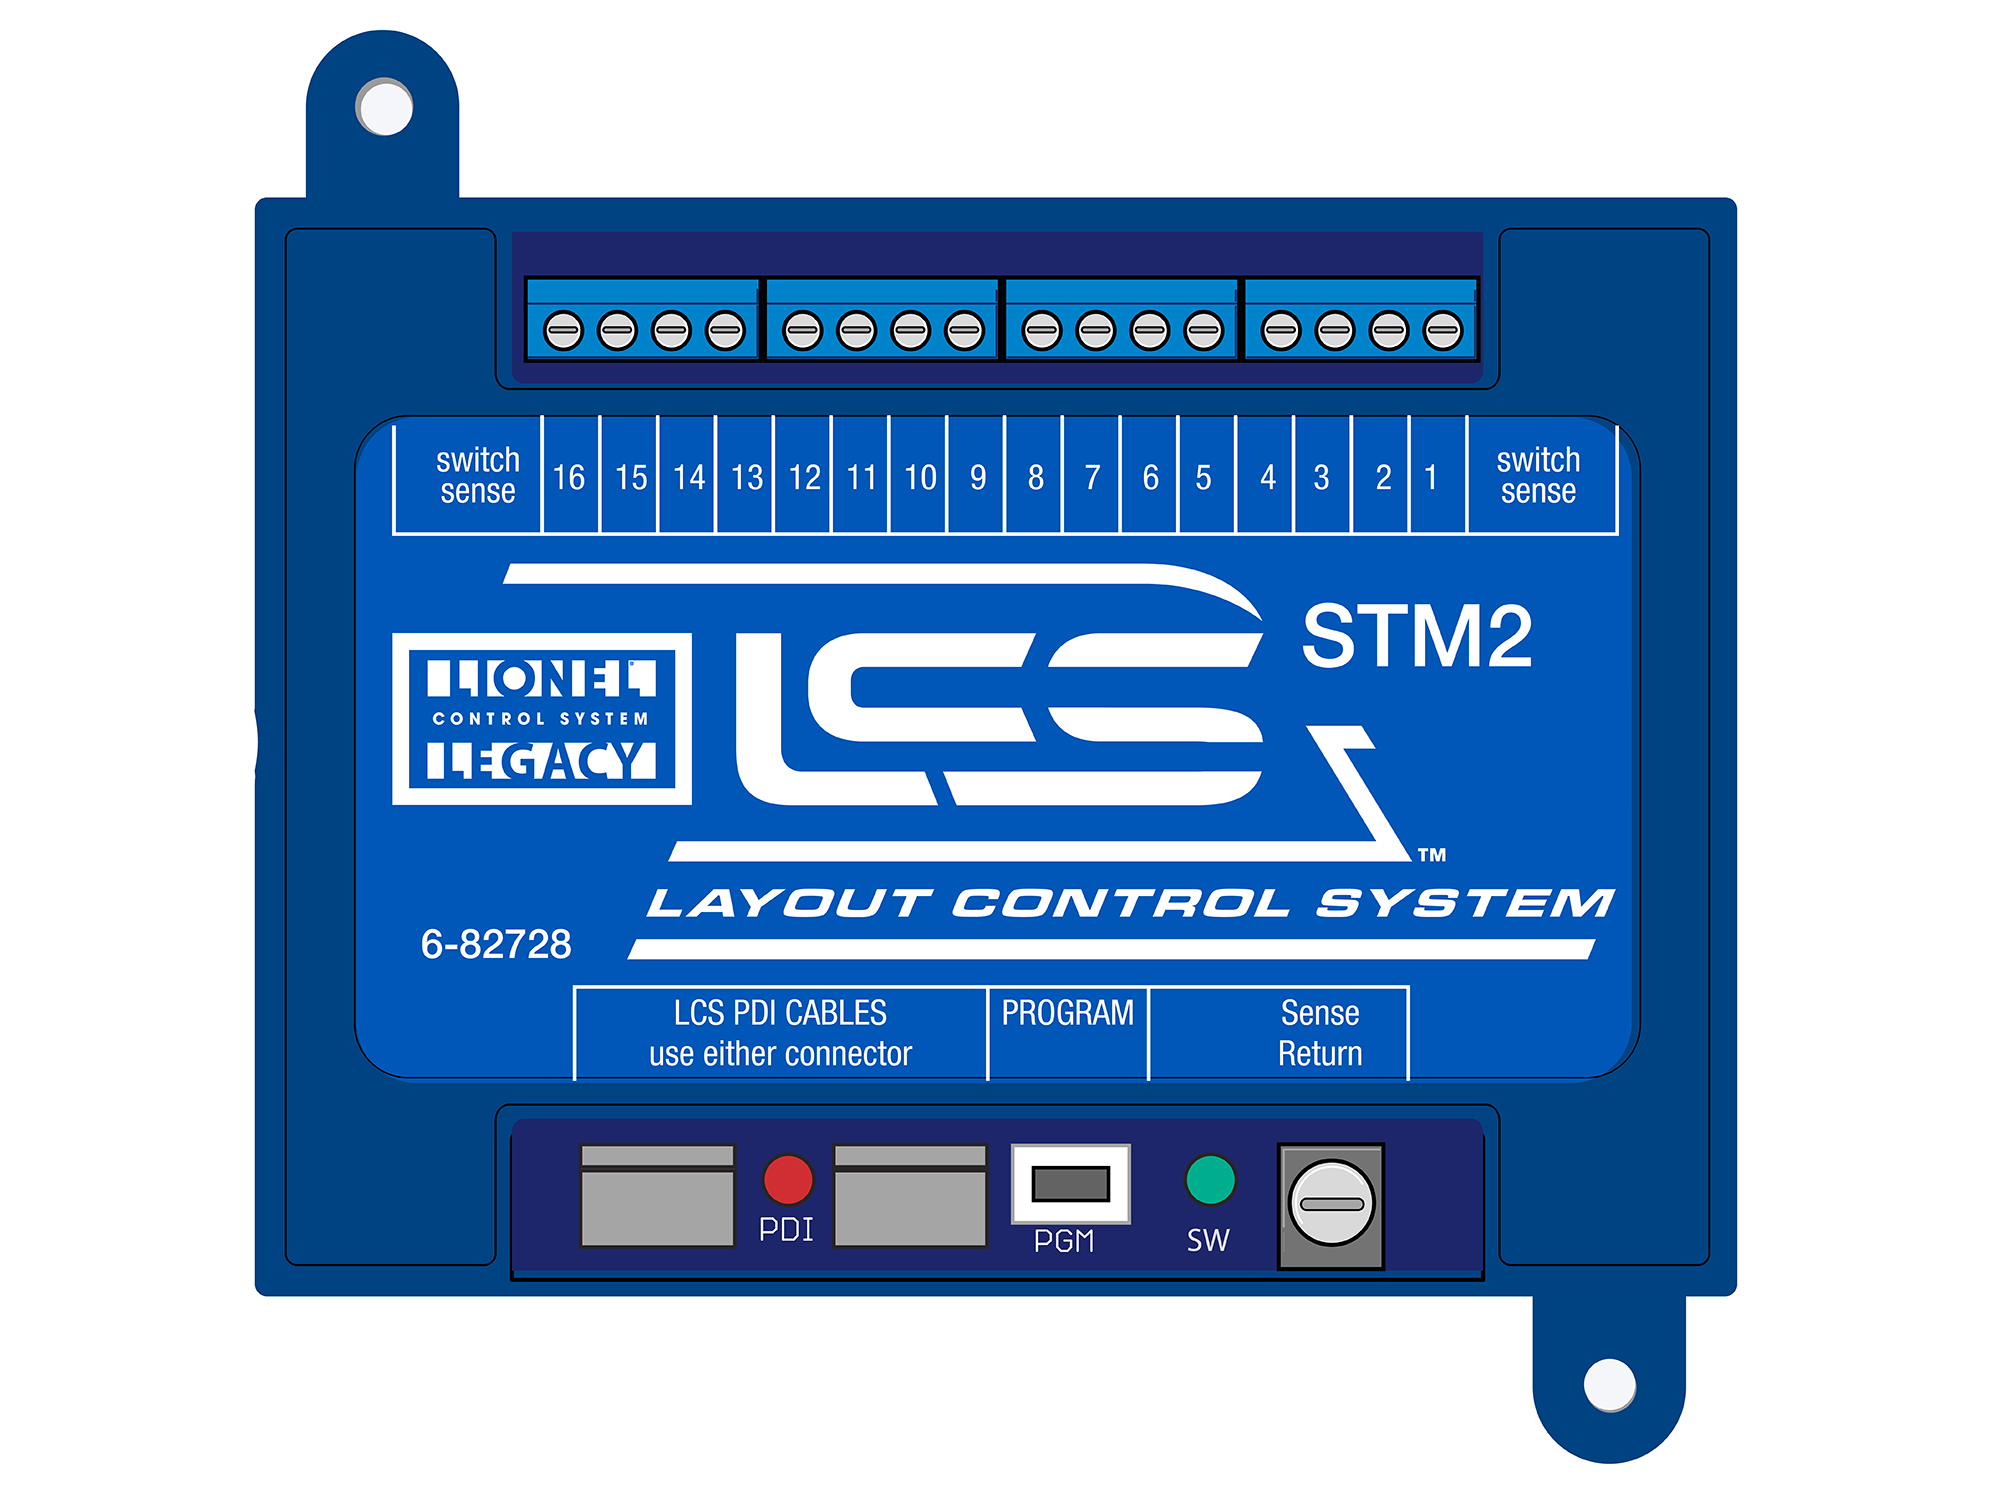 6-82728 LCS SWITCH THROW MONITOR (STM2)